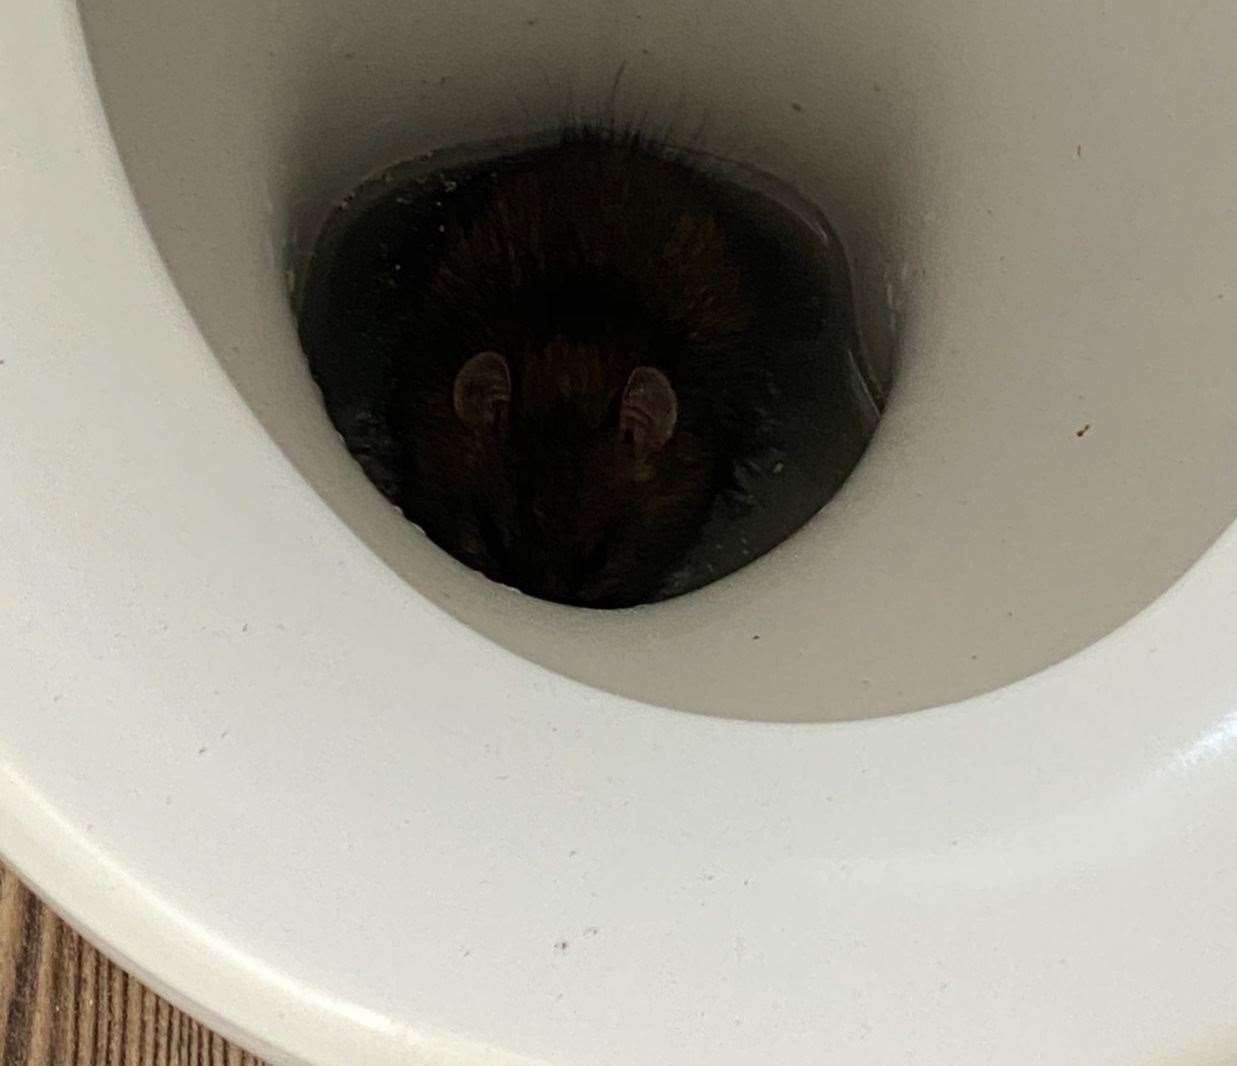 The woman awoke to use the toilet one morning in July to find a rat in her toilet